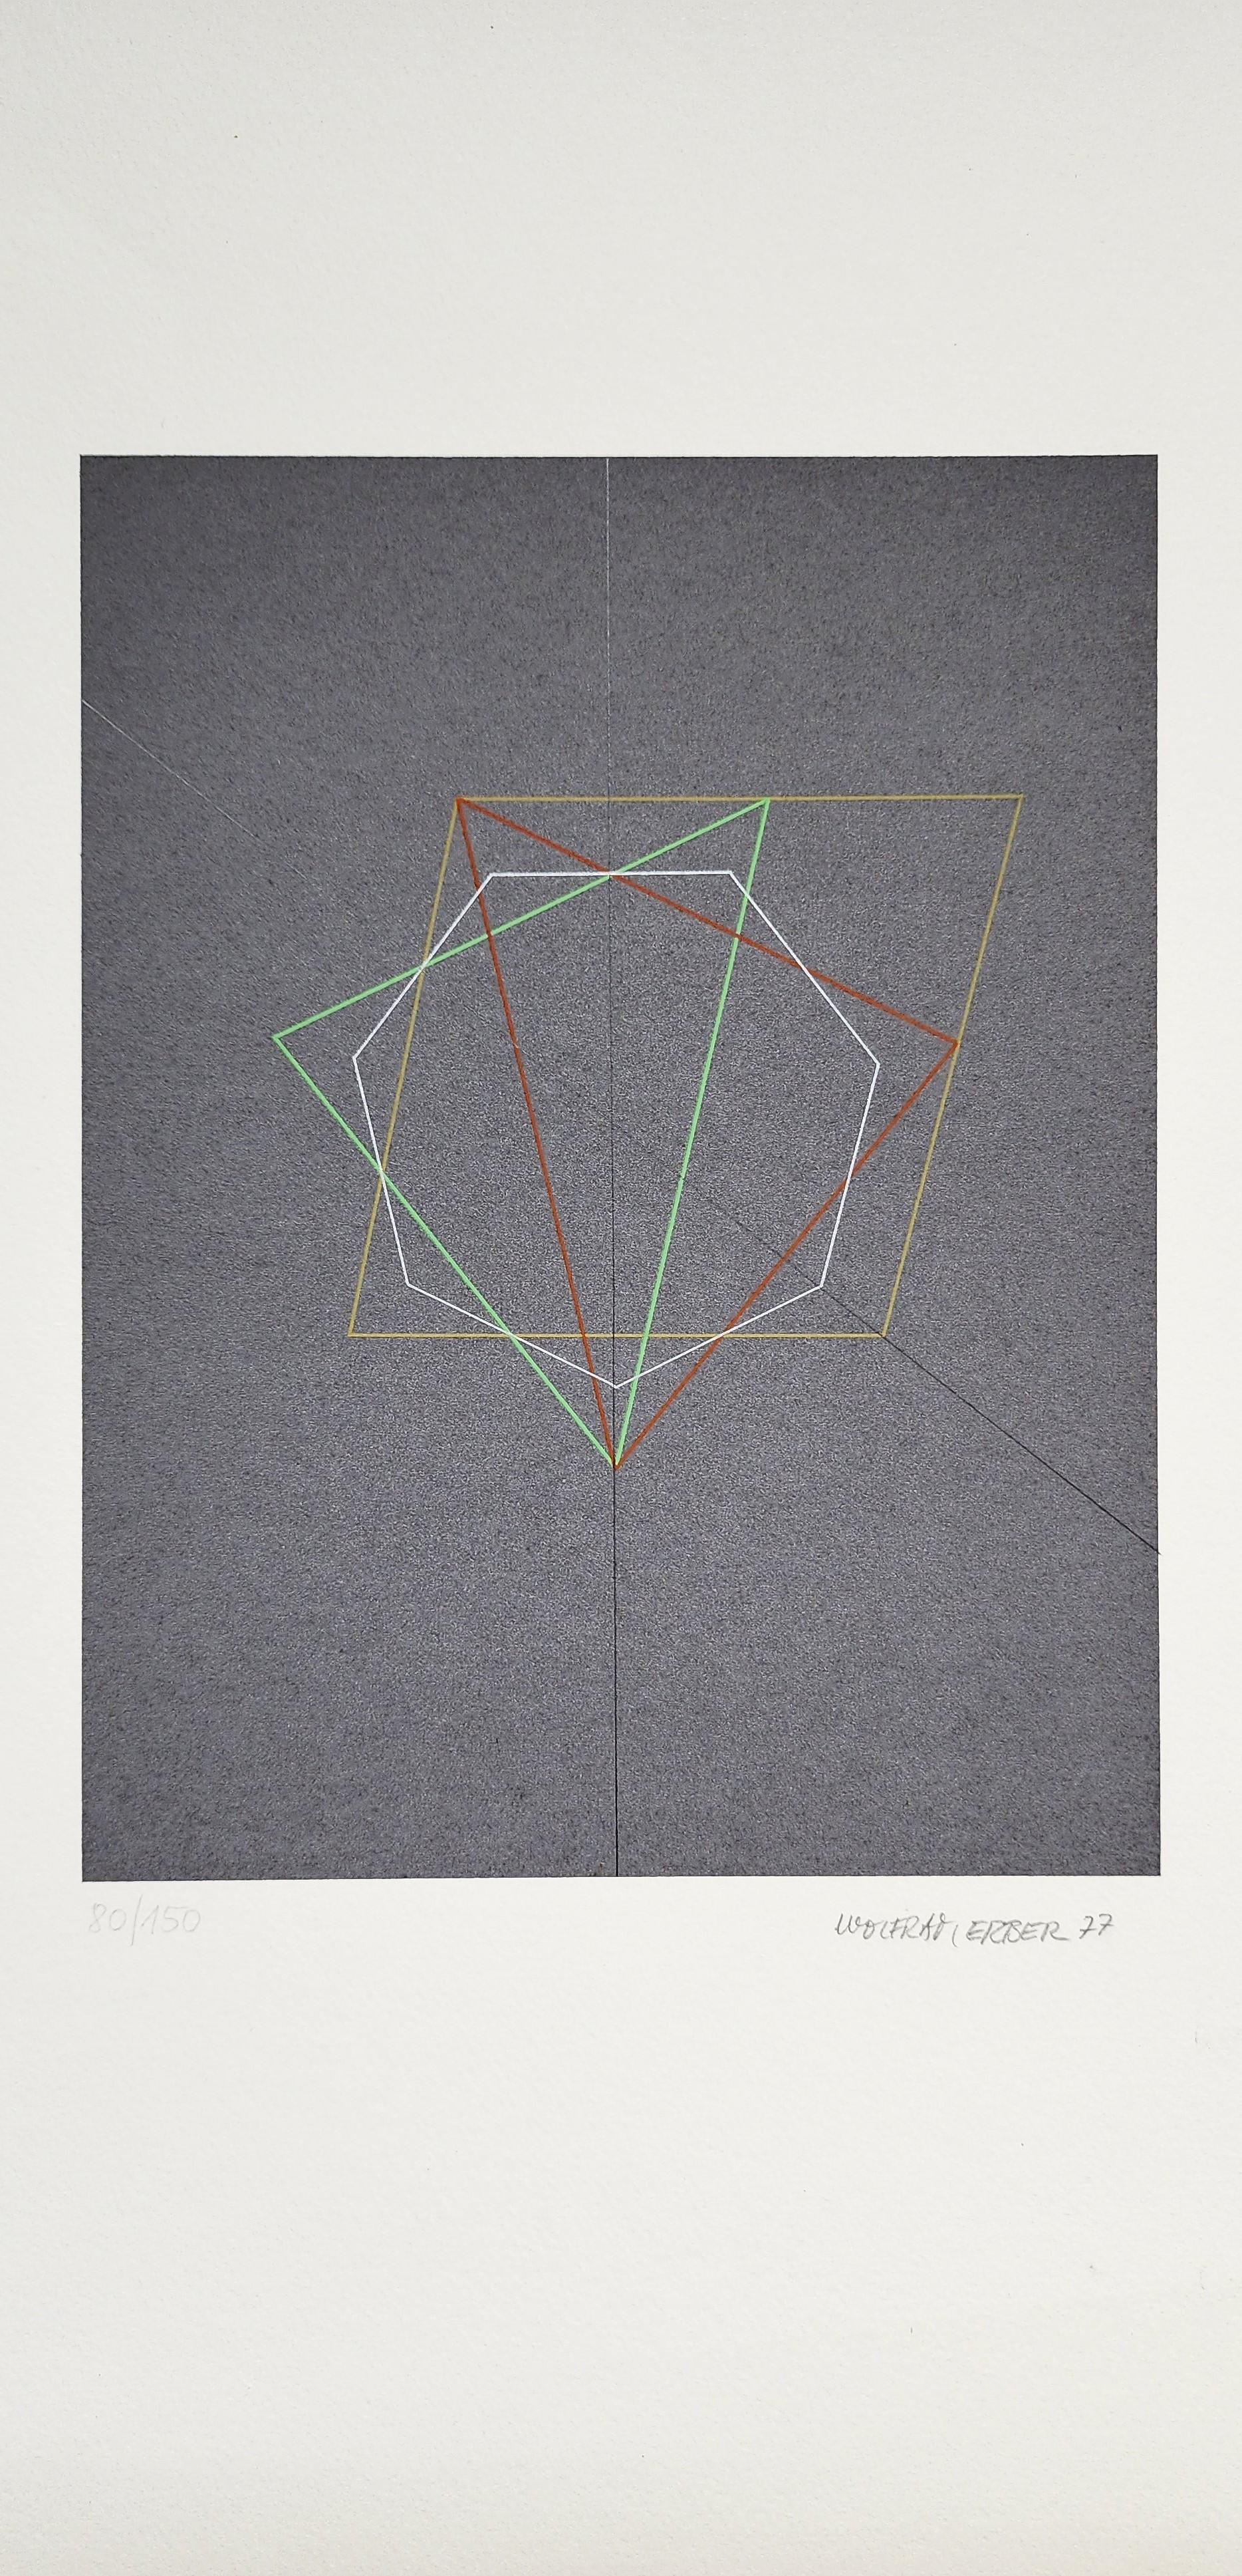 Untitled Geometric Abstraction - Print by Wolfram Erber